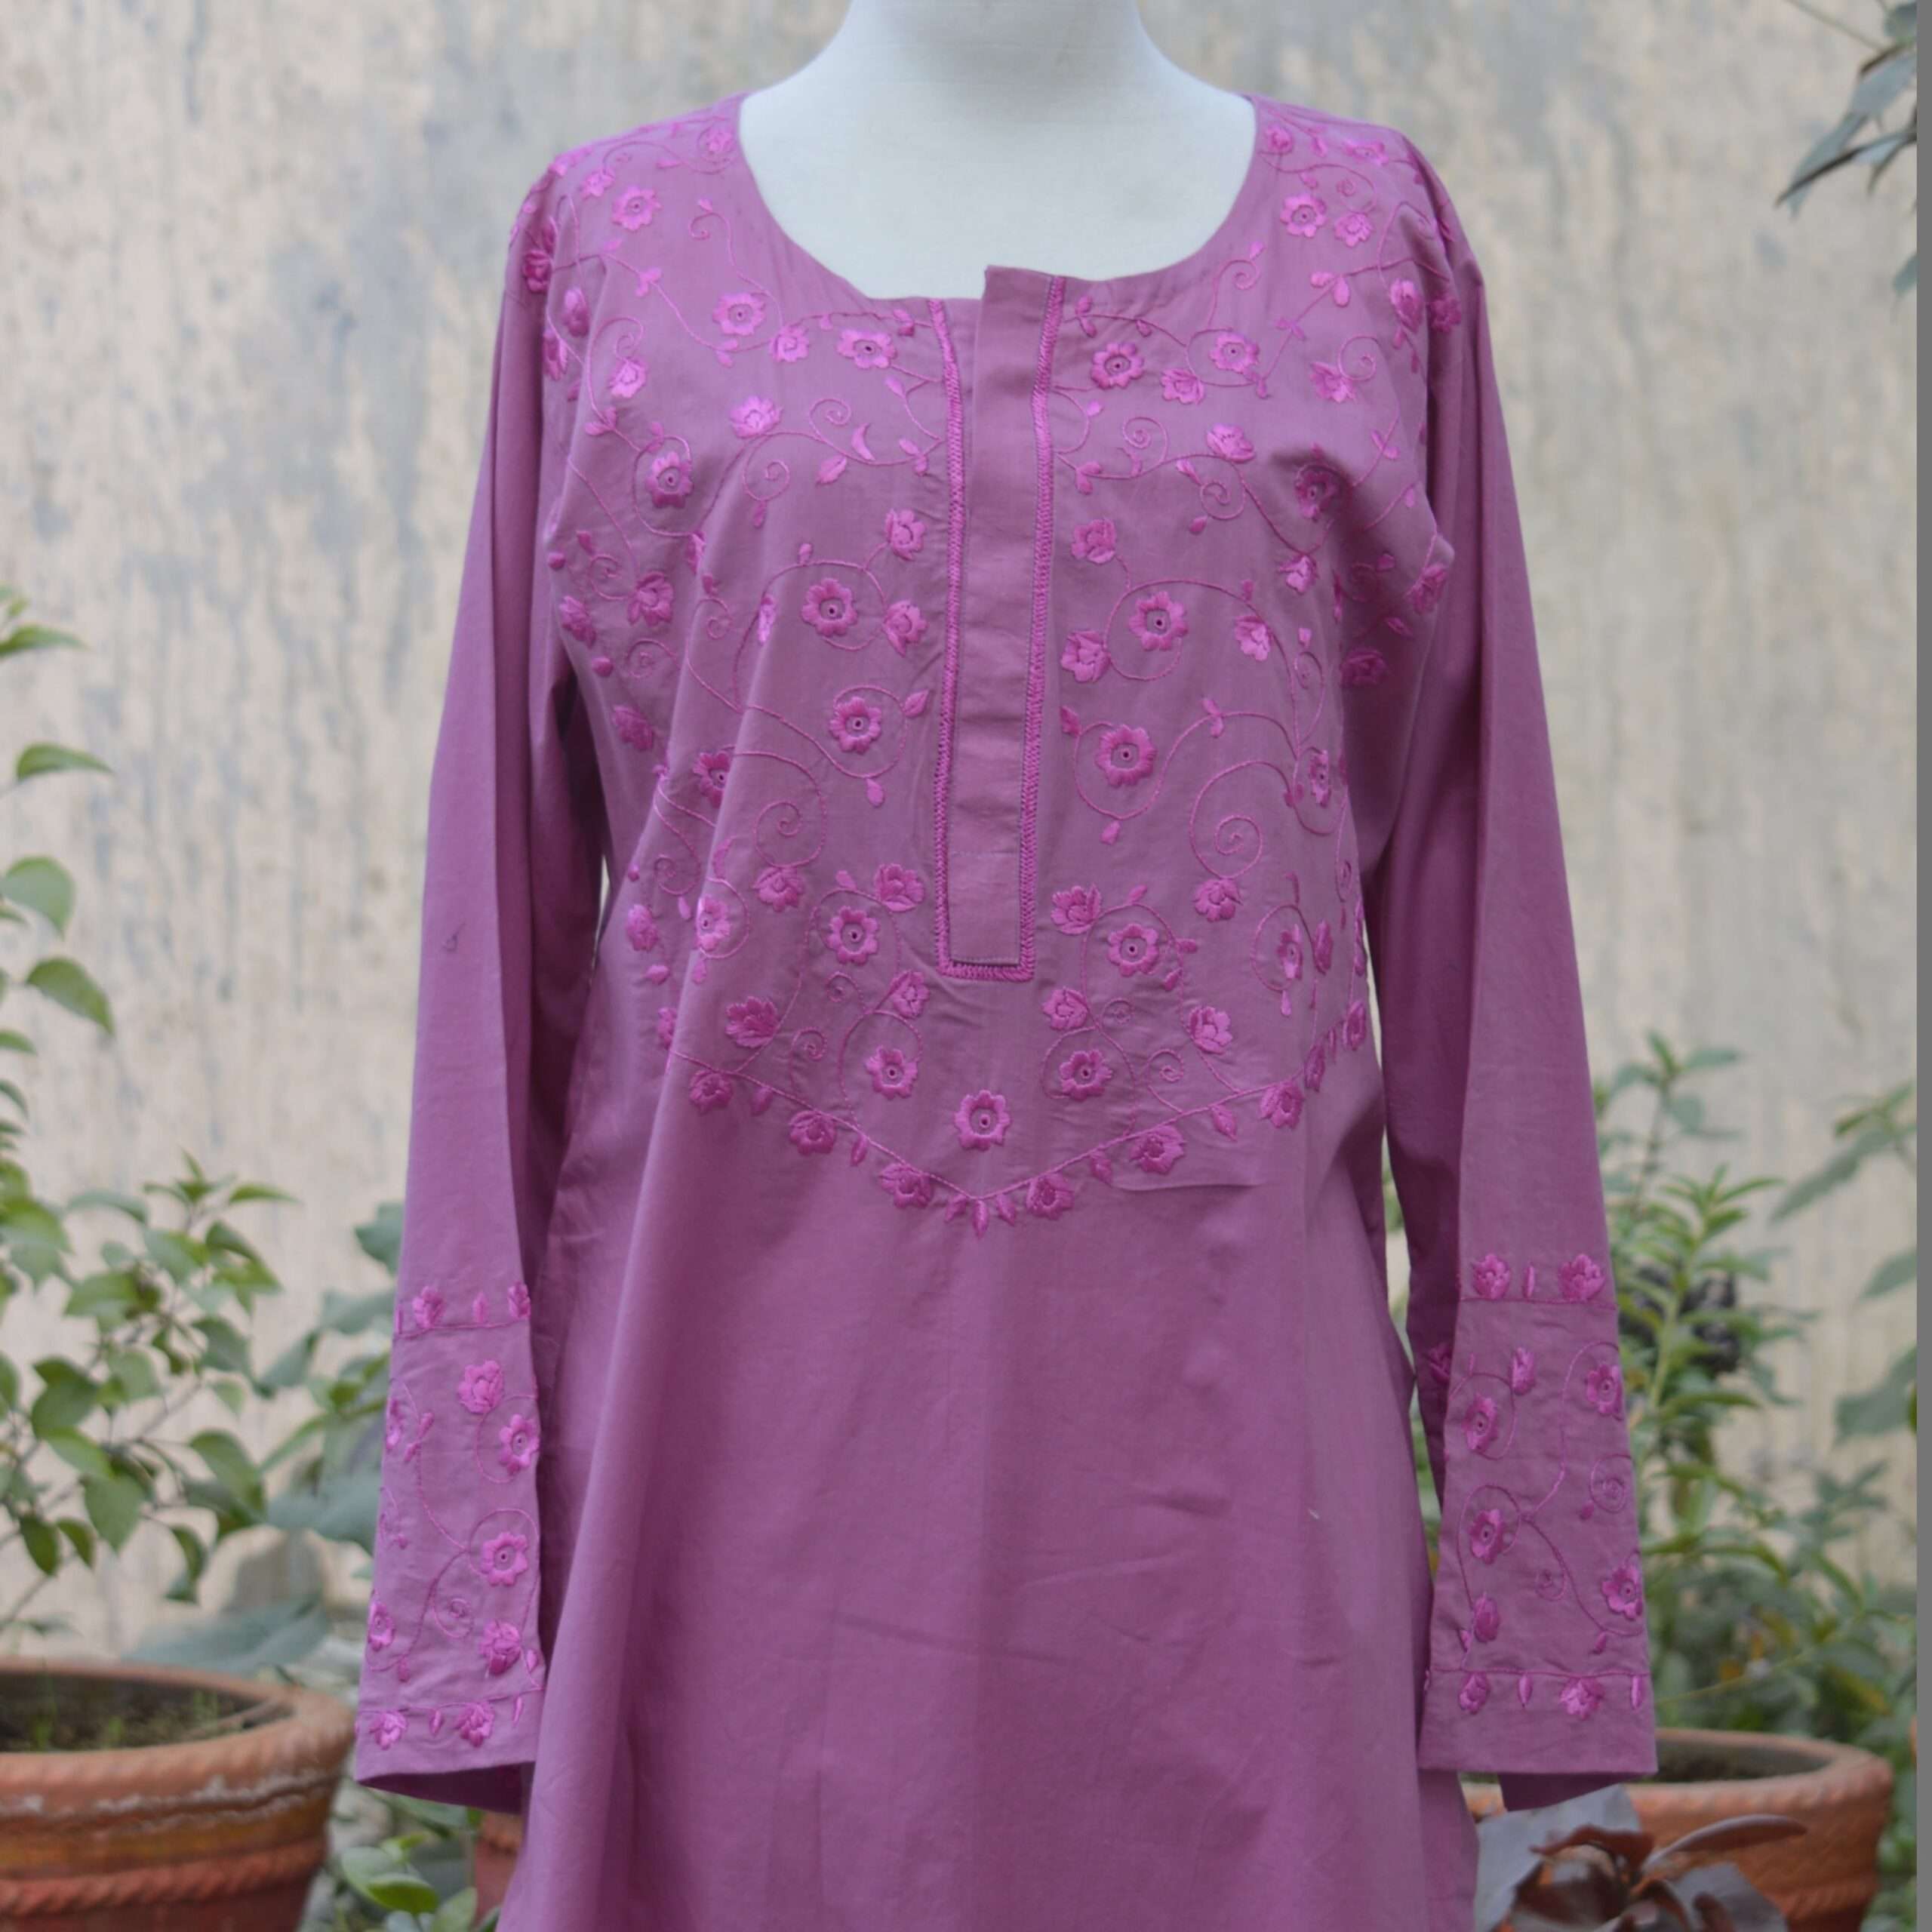 Introducing our stunning handmade embroidered powdery pink kurta! 💖
Dive into the world of elegance and grace with our latest collection

Get Free Handmade Dye Block Print Ajrak Scarf With Your Order

#Sartiyoon #HandmadeFashion #embroiderylove #SartiyoonArtisans #khalidkori #trending #handembroidery #EidCollection #SartiyoonStyle #BlockPrintCraft #BlockPrintArtistry #HandmadeFashion